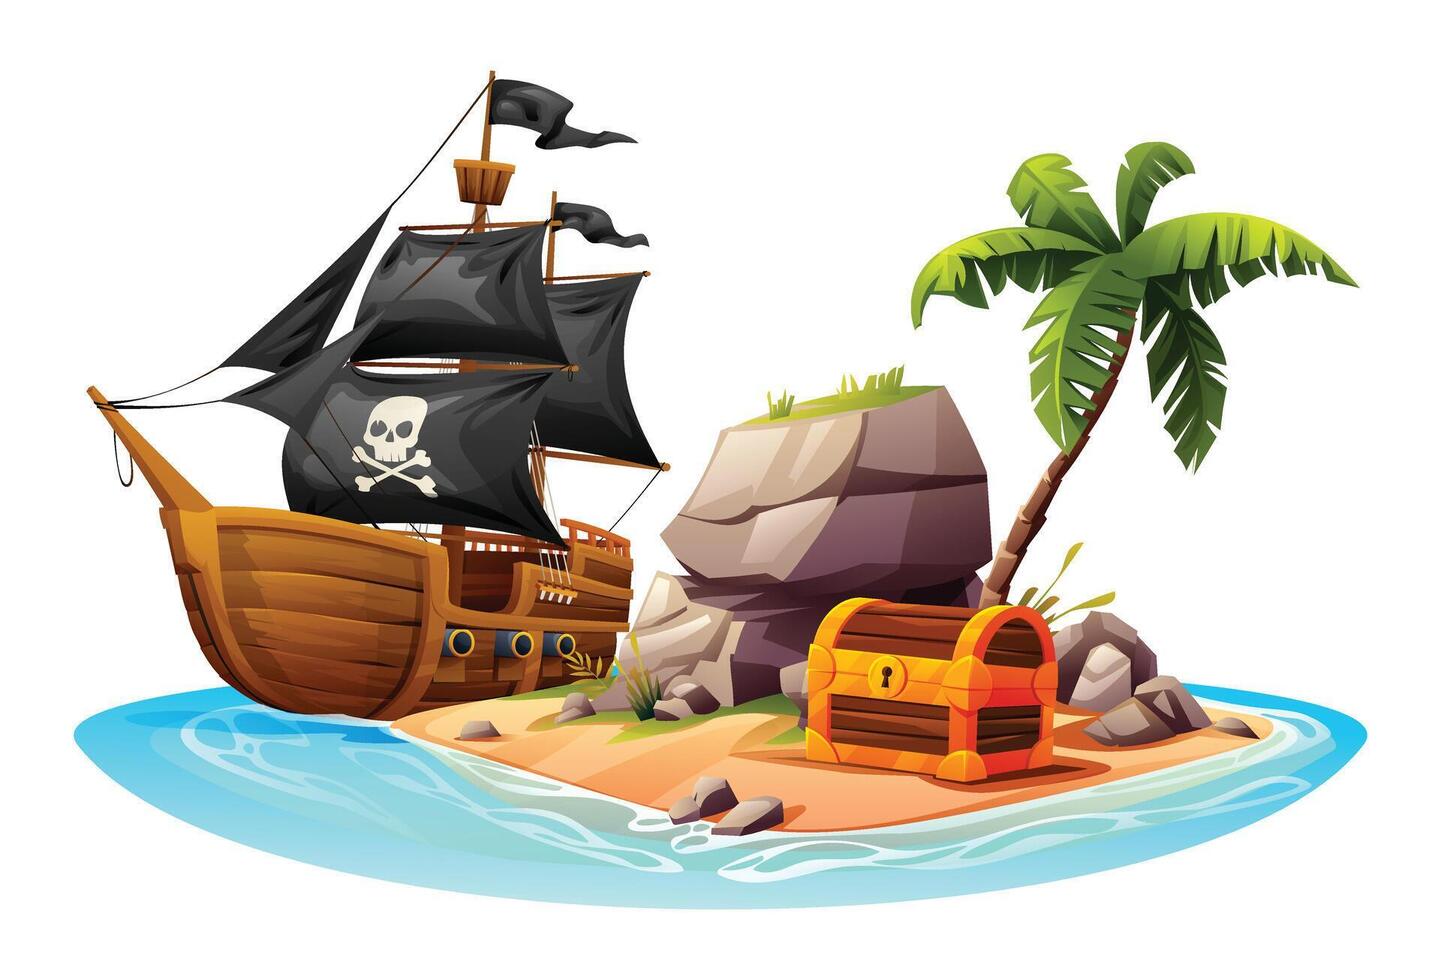 Tropical island with wooden pirate ship, treasure chest, rocks and palm tree. Vector cartoon illustration isolated on white background